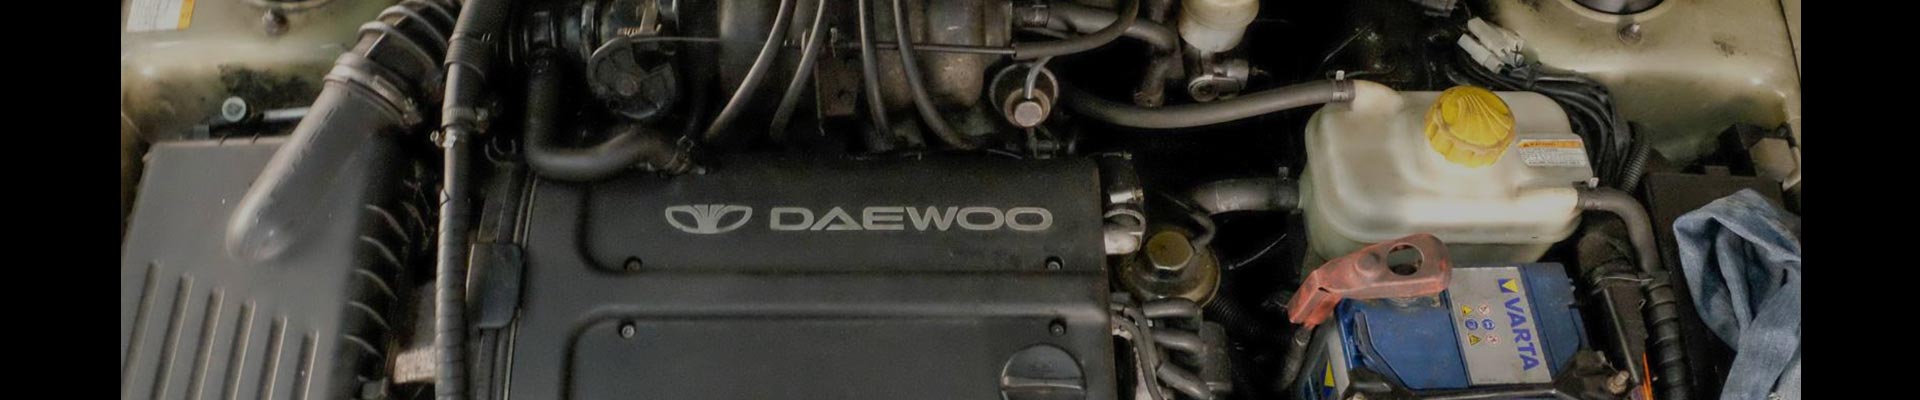 Shop Replacement Daewoo Leganza Parts with Discounted Price on the Net